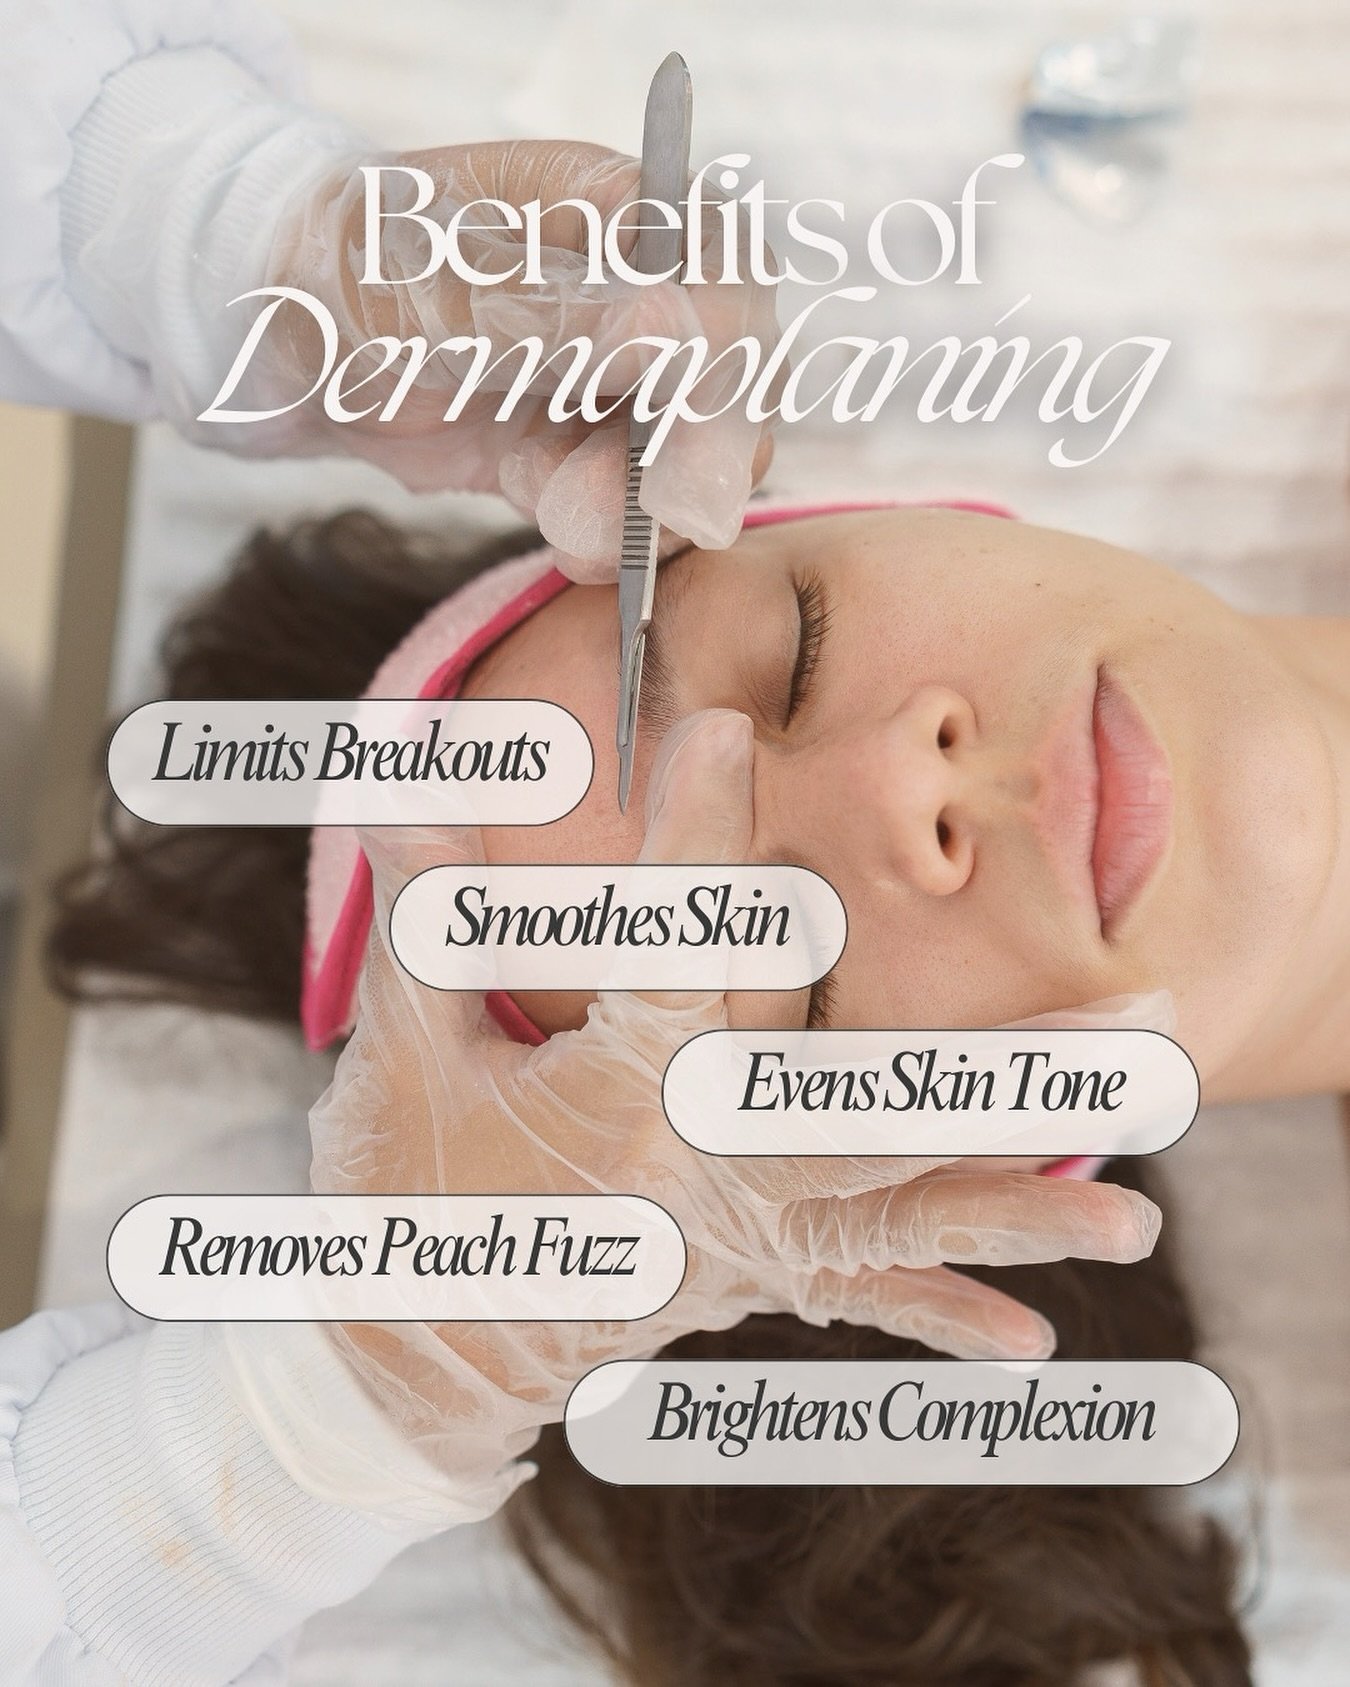 Reveal smoother, brighter skin with our dermaplaning treatments✨ This quick exfoliation removes 2 weeks&rsquo; worth of dead skin cells and peach fuzz, leaving your skin instantly refreshed and radiant. Perfect for in-between electrolysis sessions!

